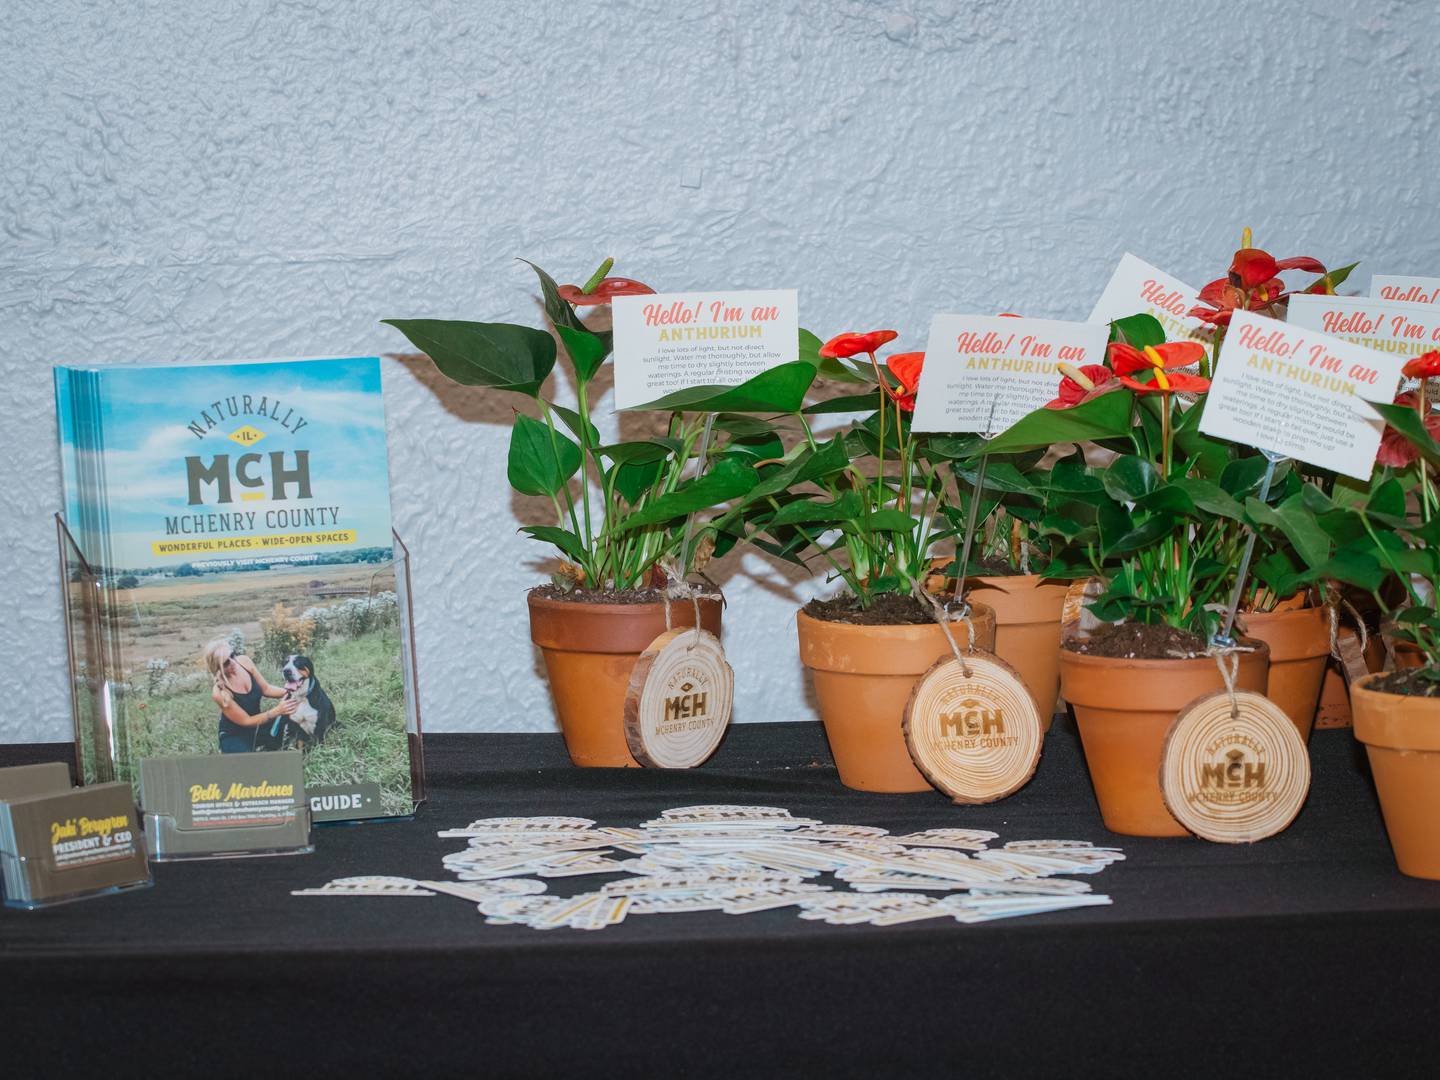 An all-new visitor guide and potted anthuriums are available for guests celebrating the launch of Naturally McHenry County, a rebranding of Visit McHenry County, on Thursday, March 3, 2022, at the Dole in Crystal Lake.